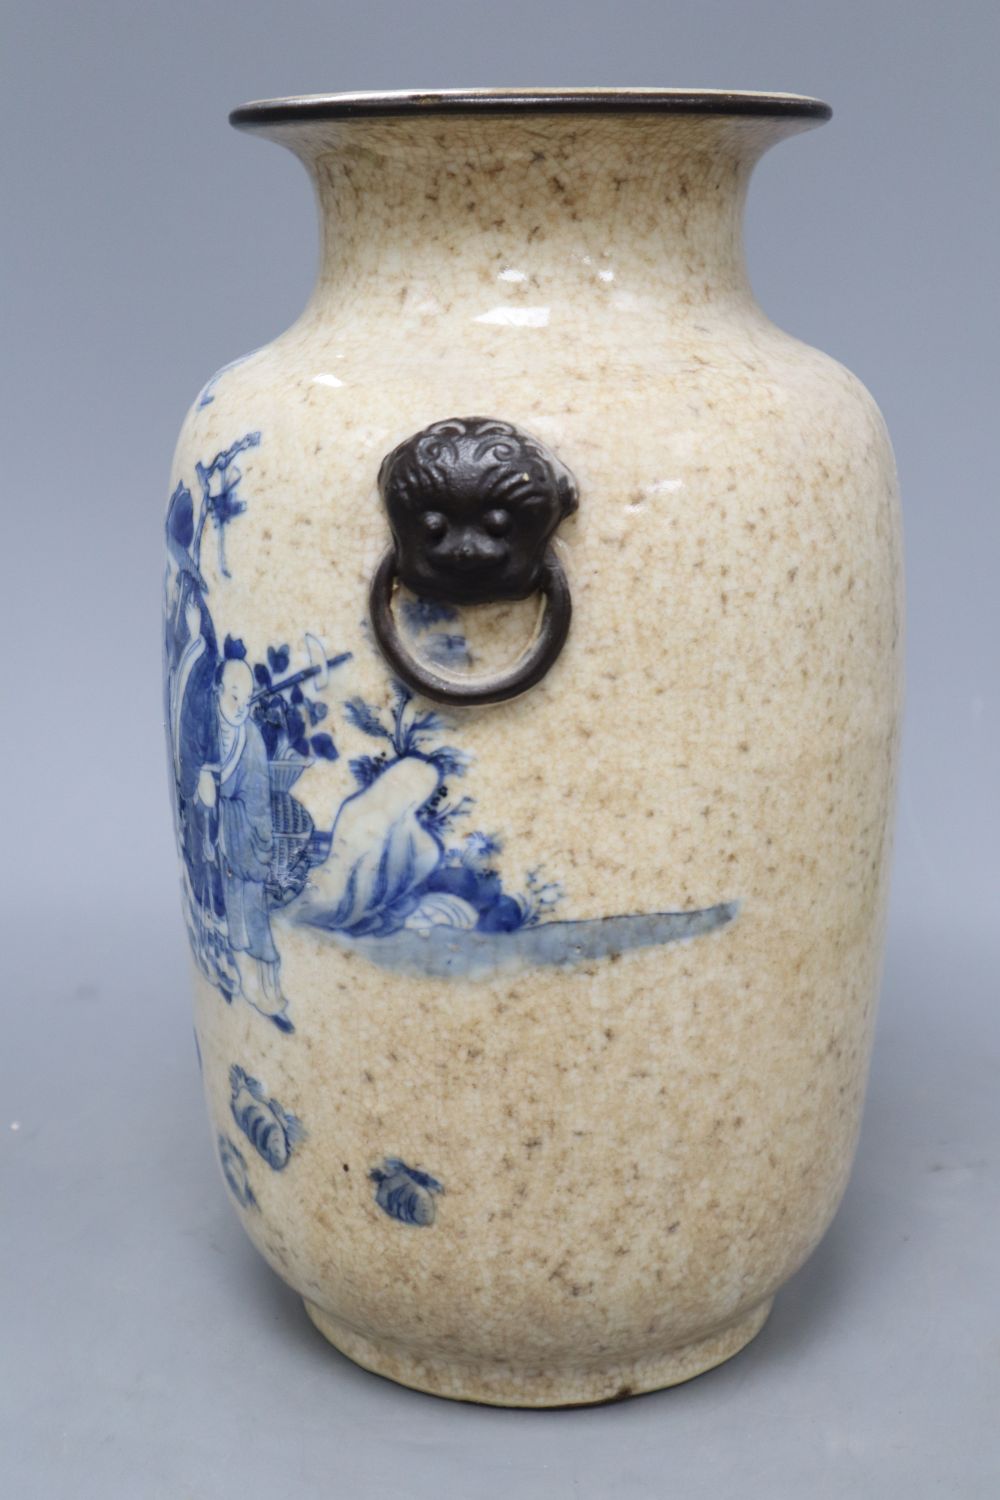 A Chinese blue and white crackleglaze vase c.1900, height 35cm